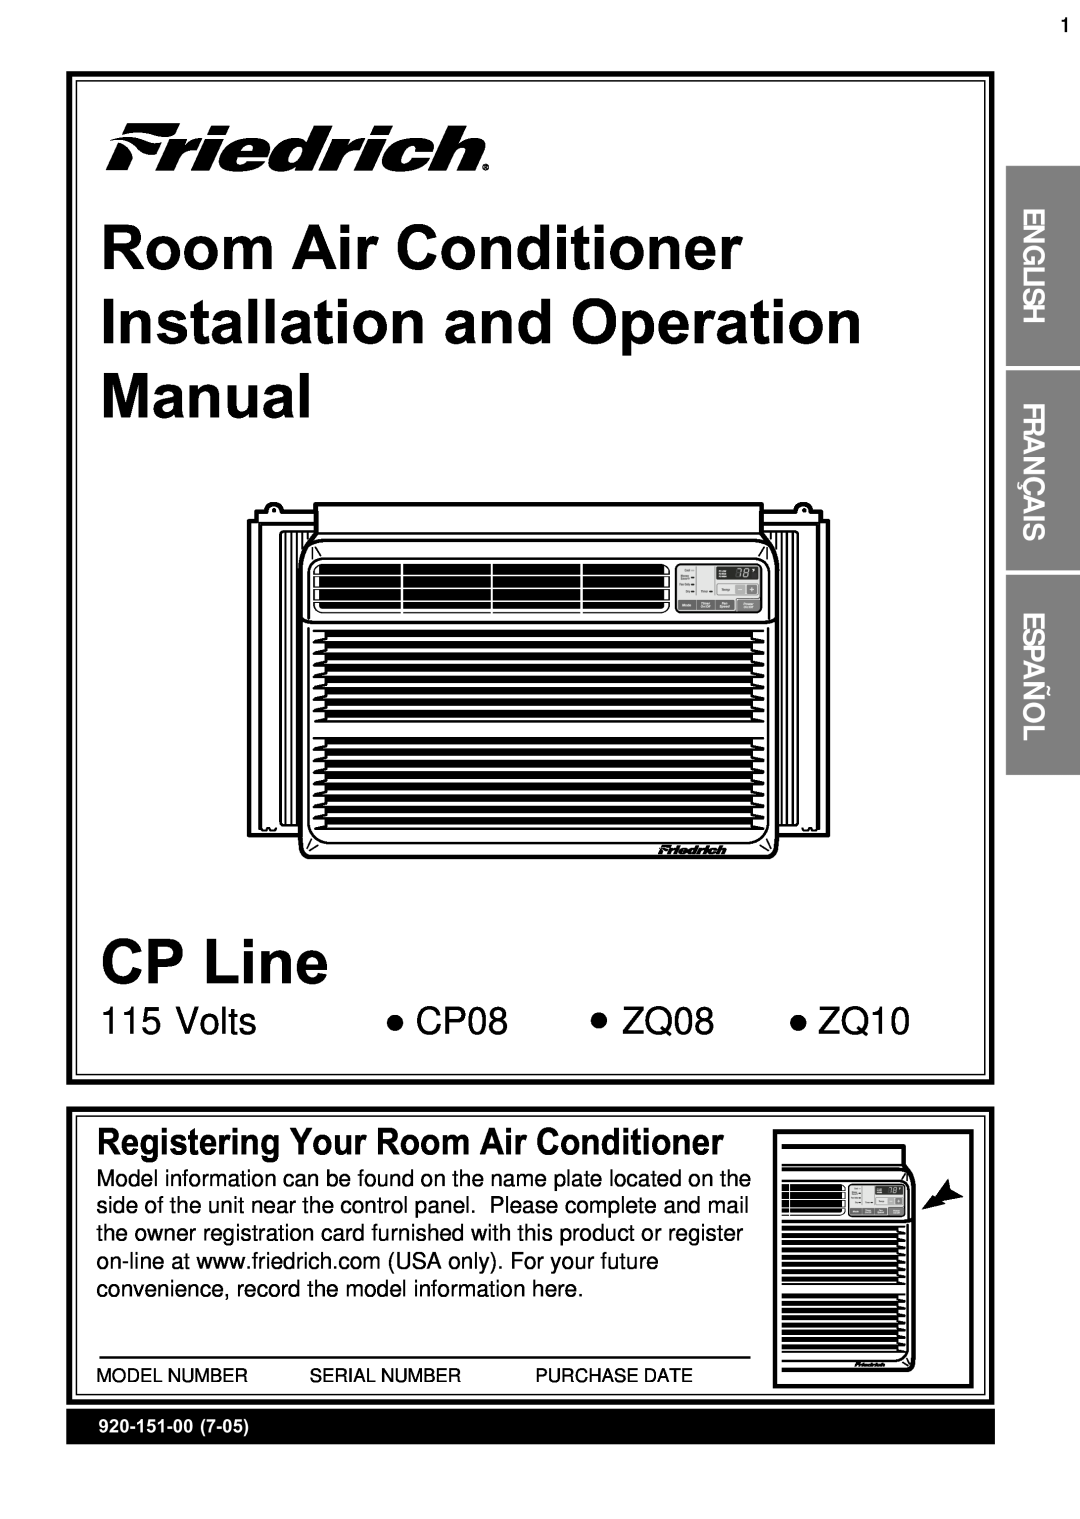 Friedrich CP08 operation manual Room Air Conditioner Installation and Operation, Manual CP Line, Volts, ZQ08, ZQ10 